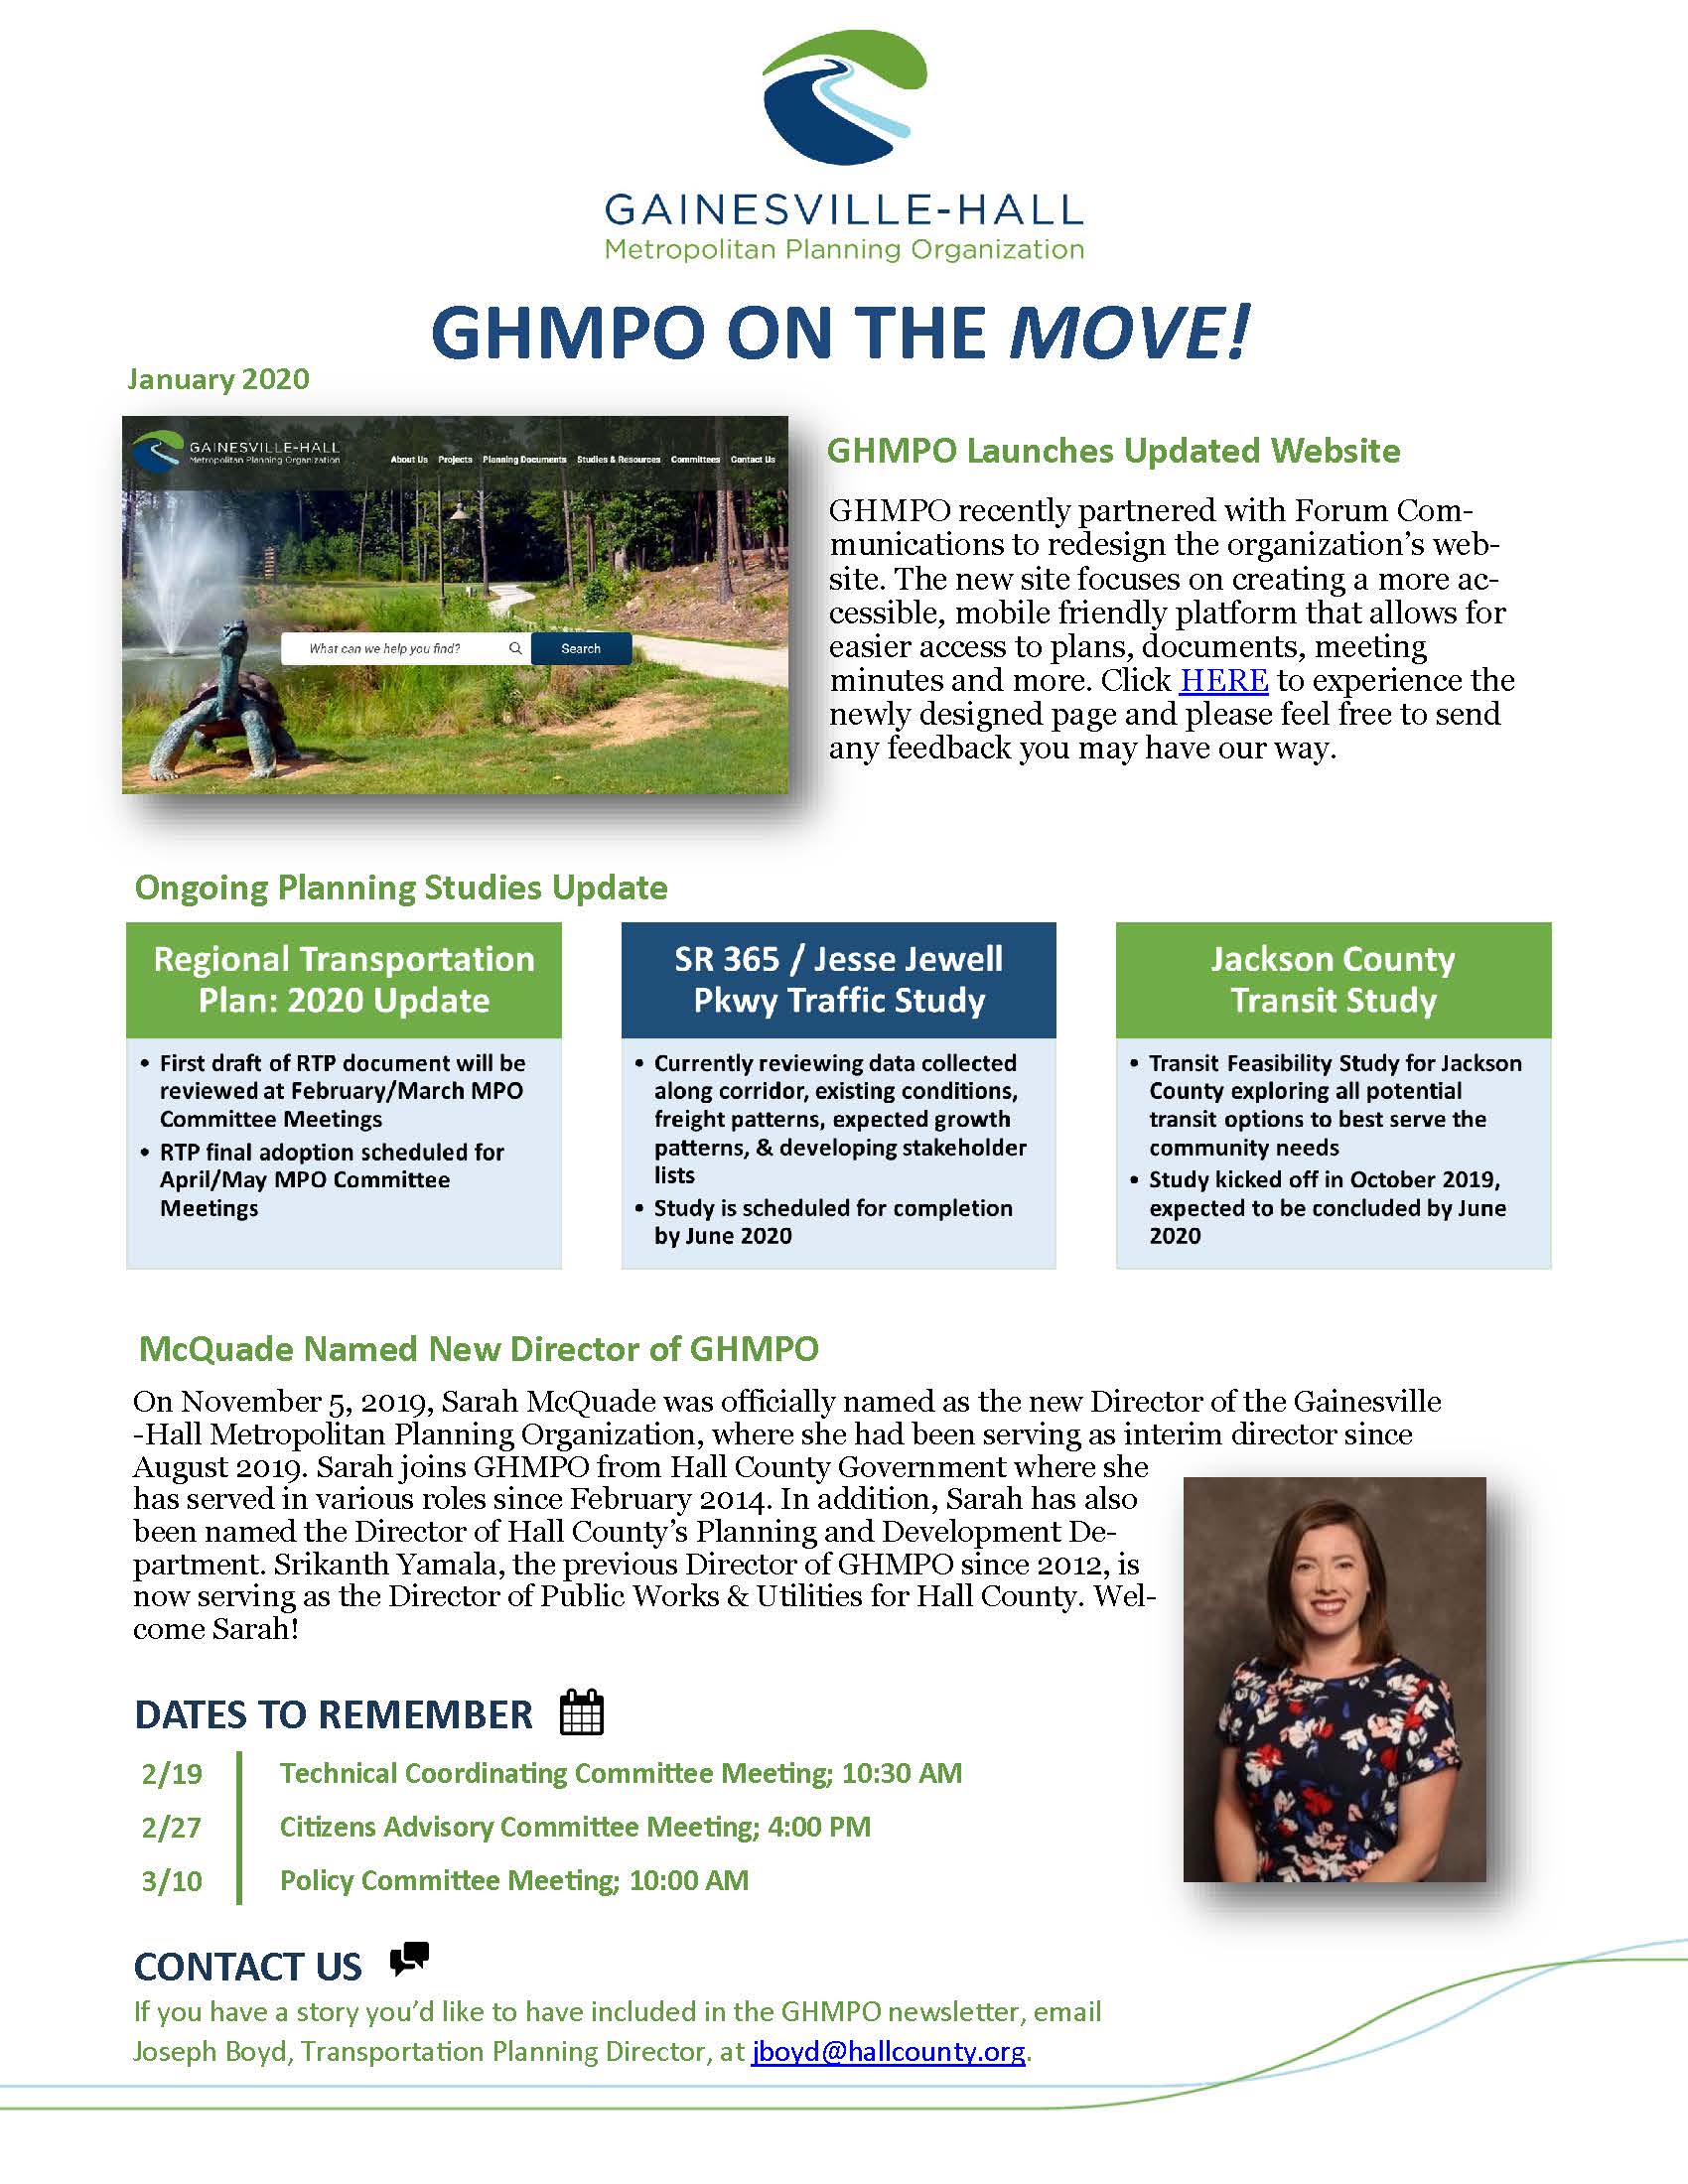 GHMPO 2020 Newsletter